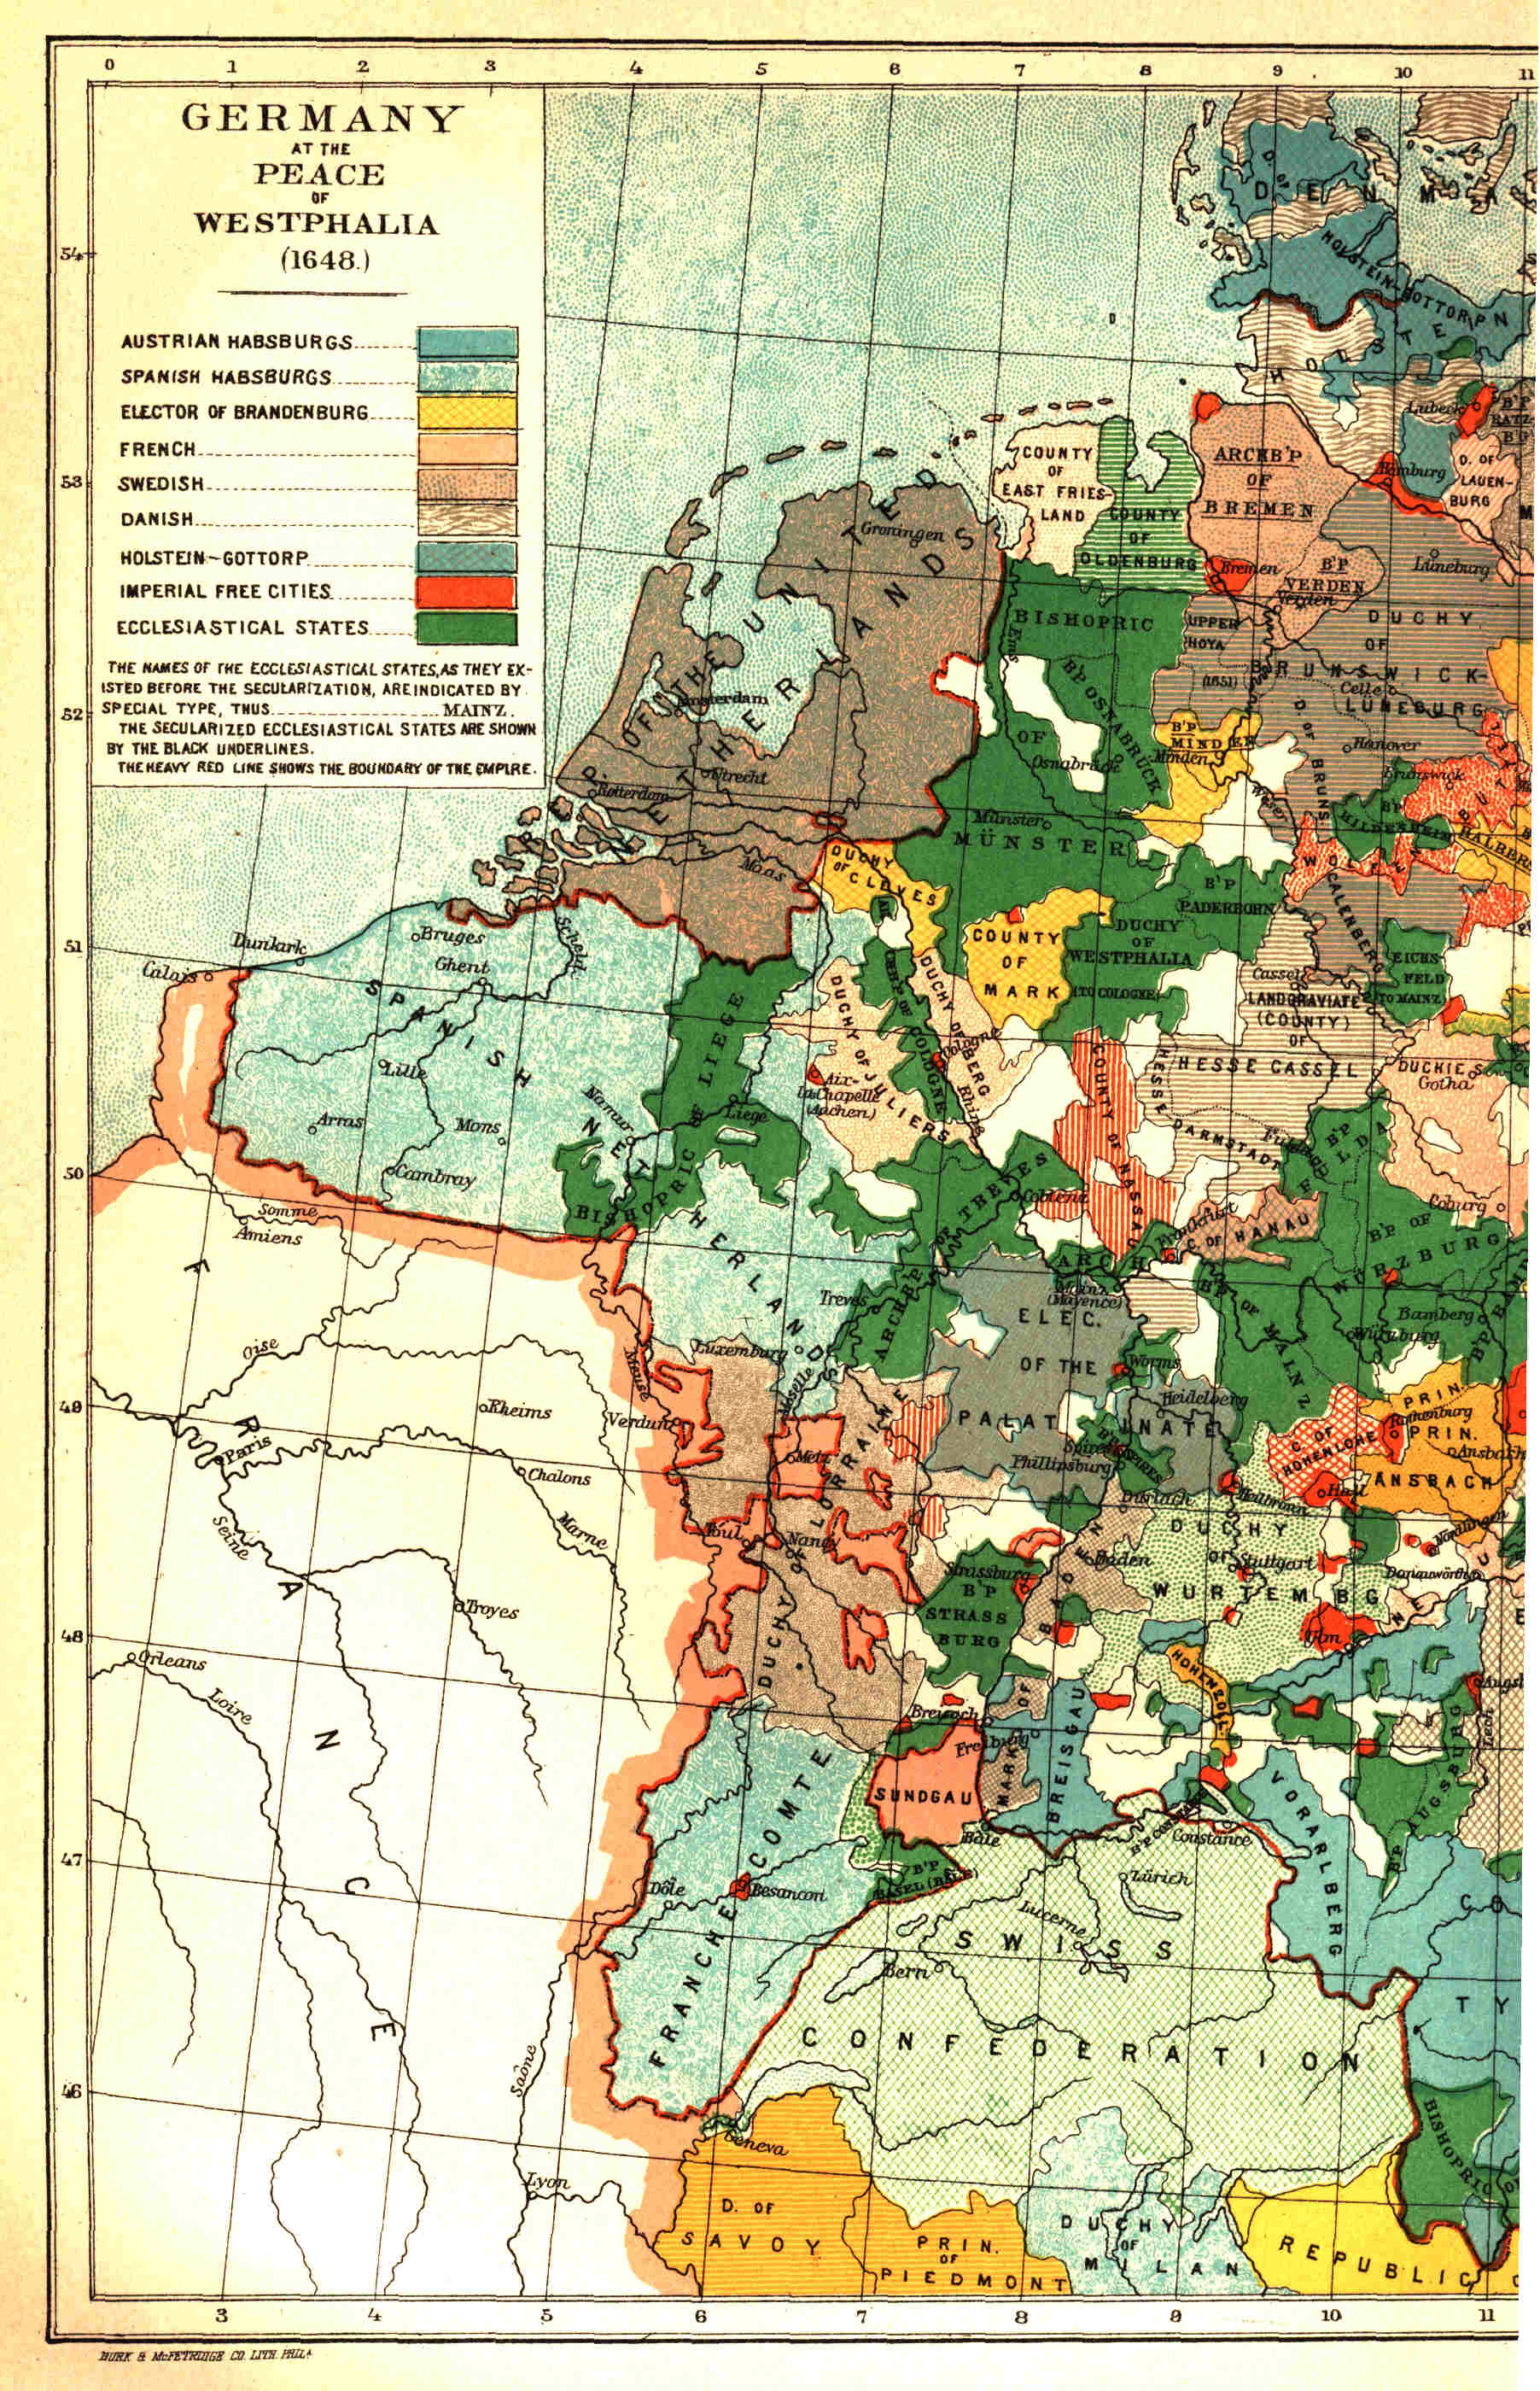 Germany at the peace of Westphalia.